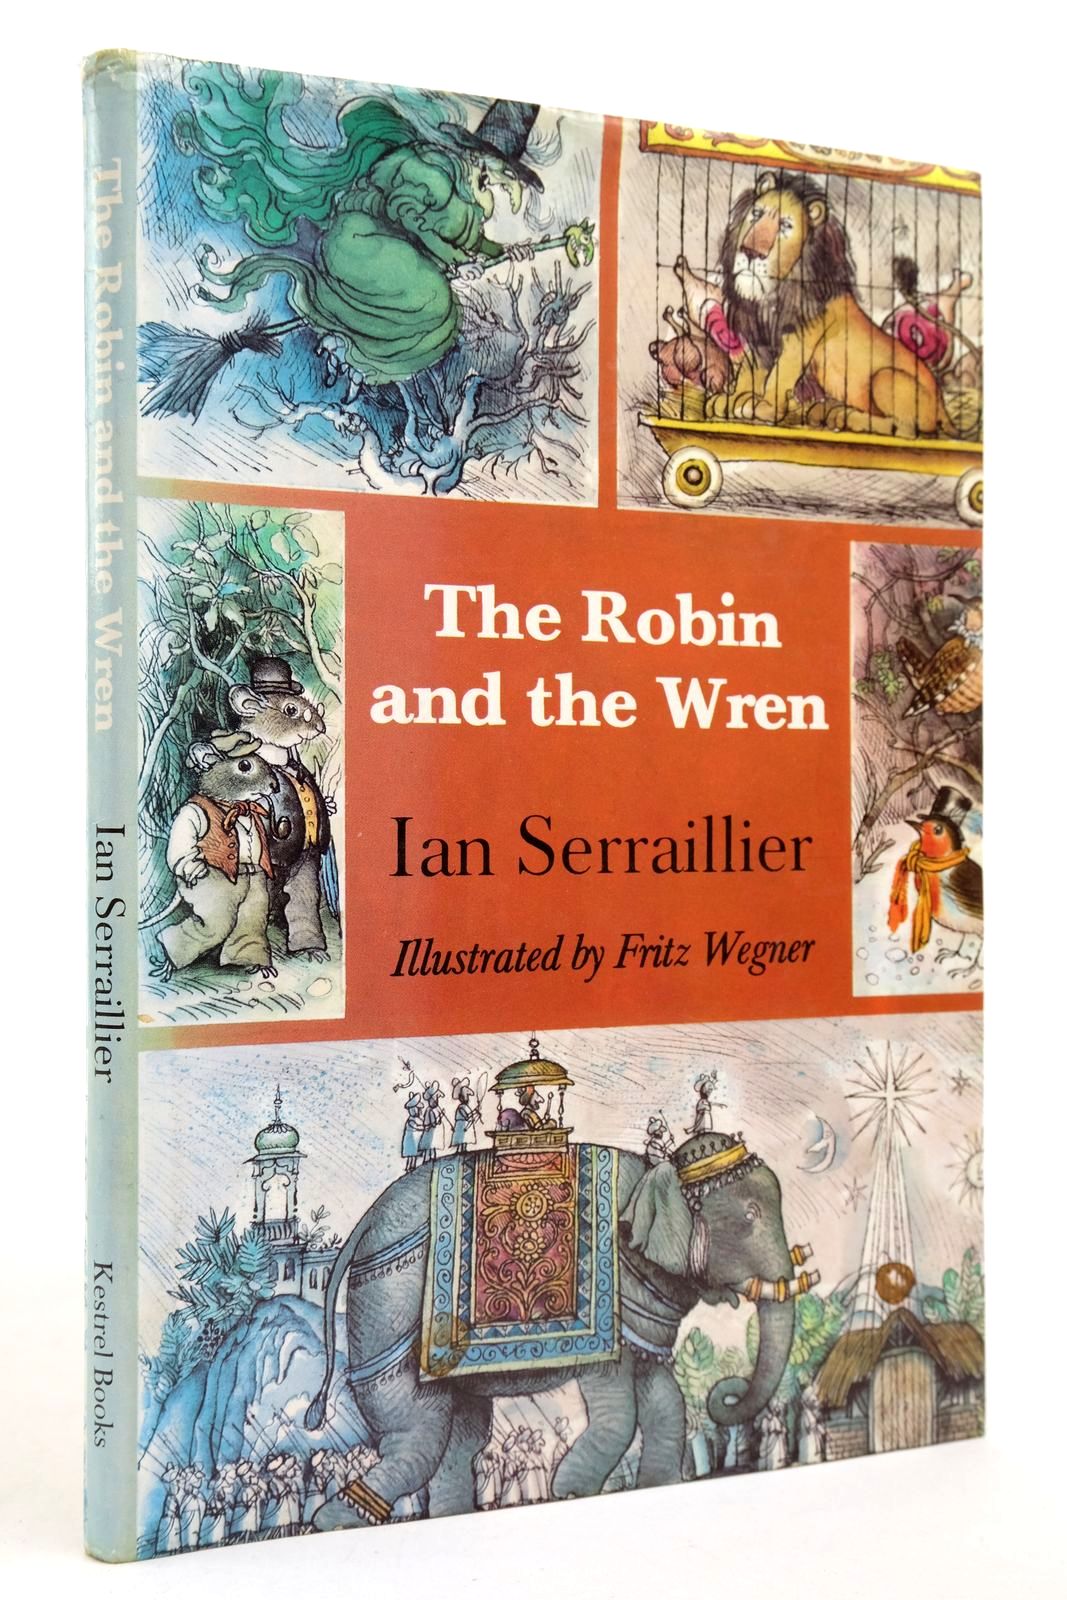 Photo of THE ROBIN AND THE WREN written by Serraillier, Ian illustrated by Wegner, Fritz published by Kestrel Books (STOCK CODE: 2139971)  for sale by Stella & Rose's Books